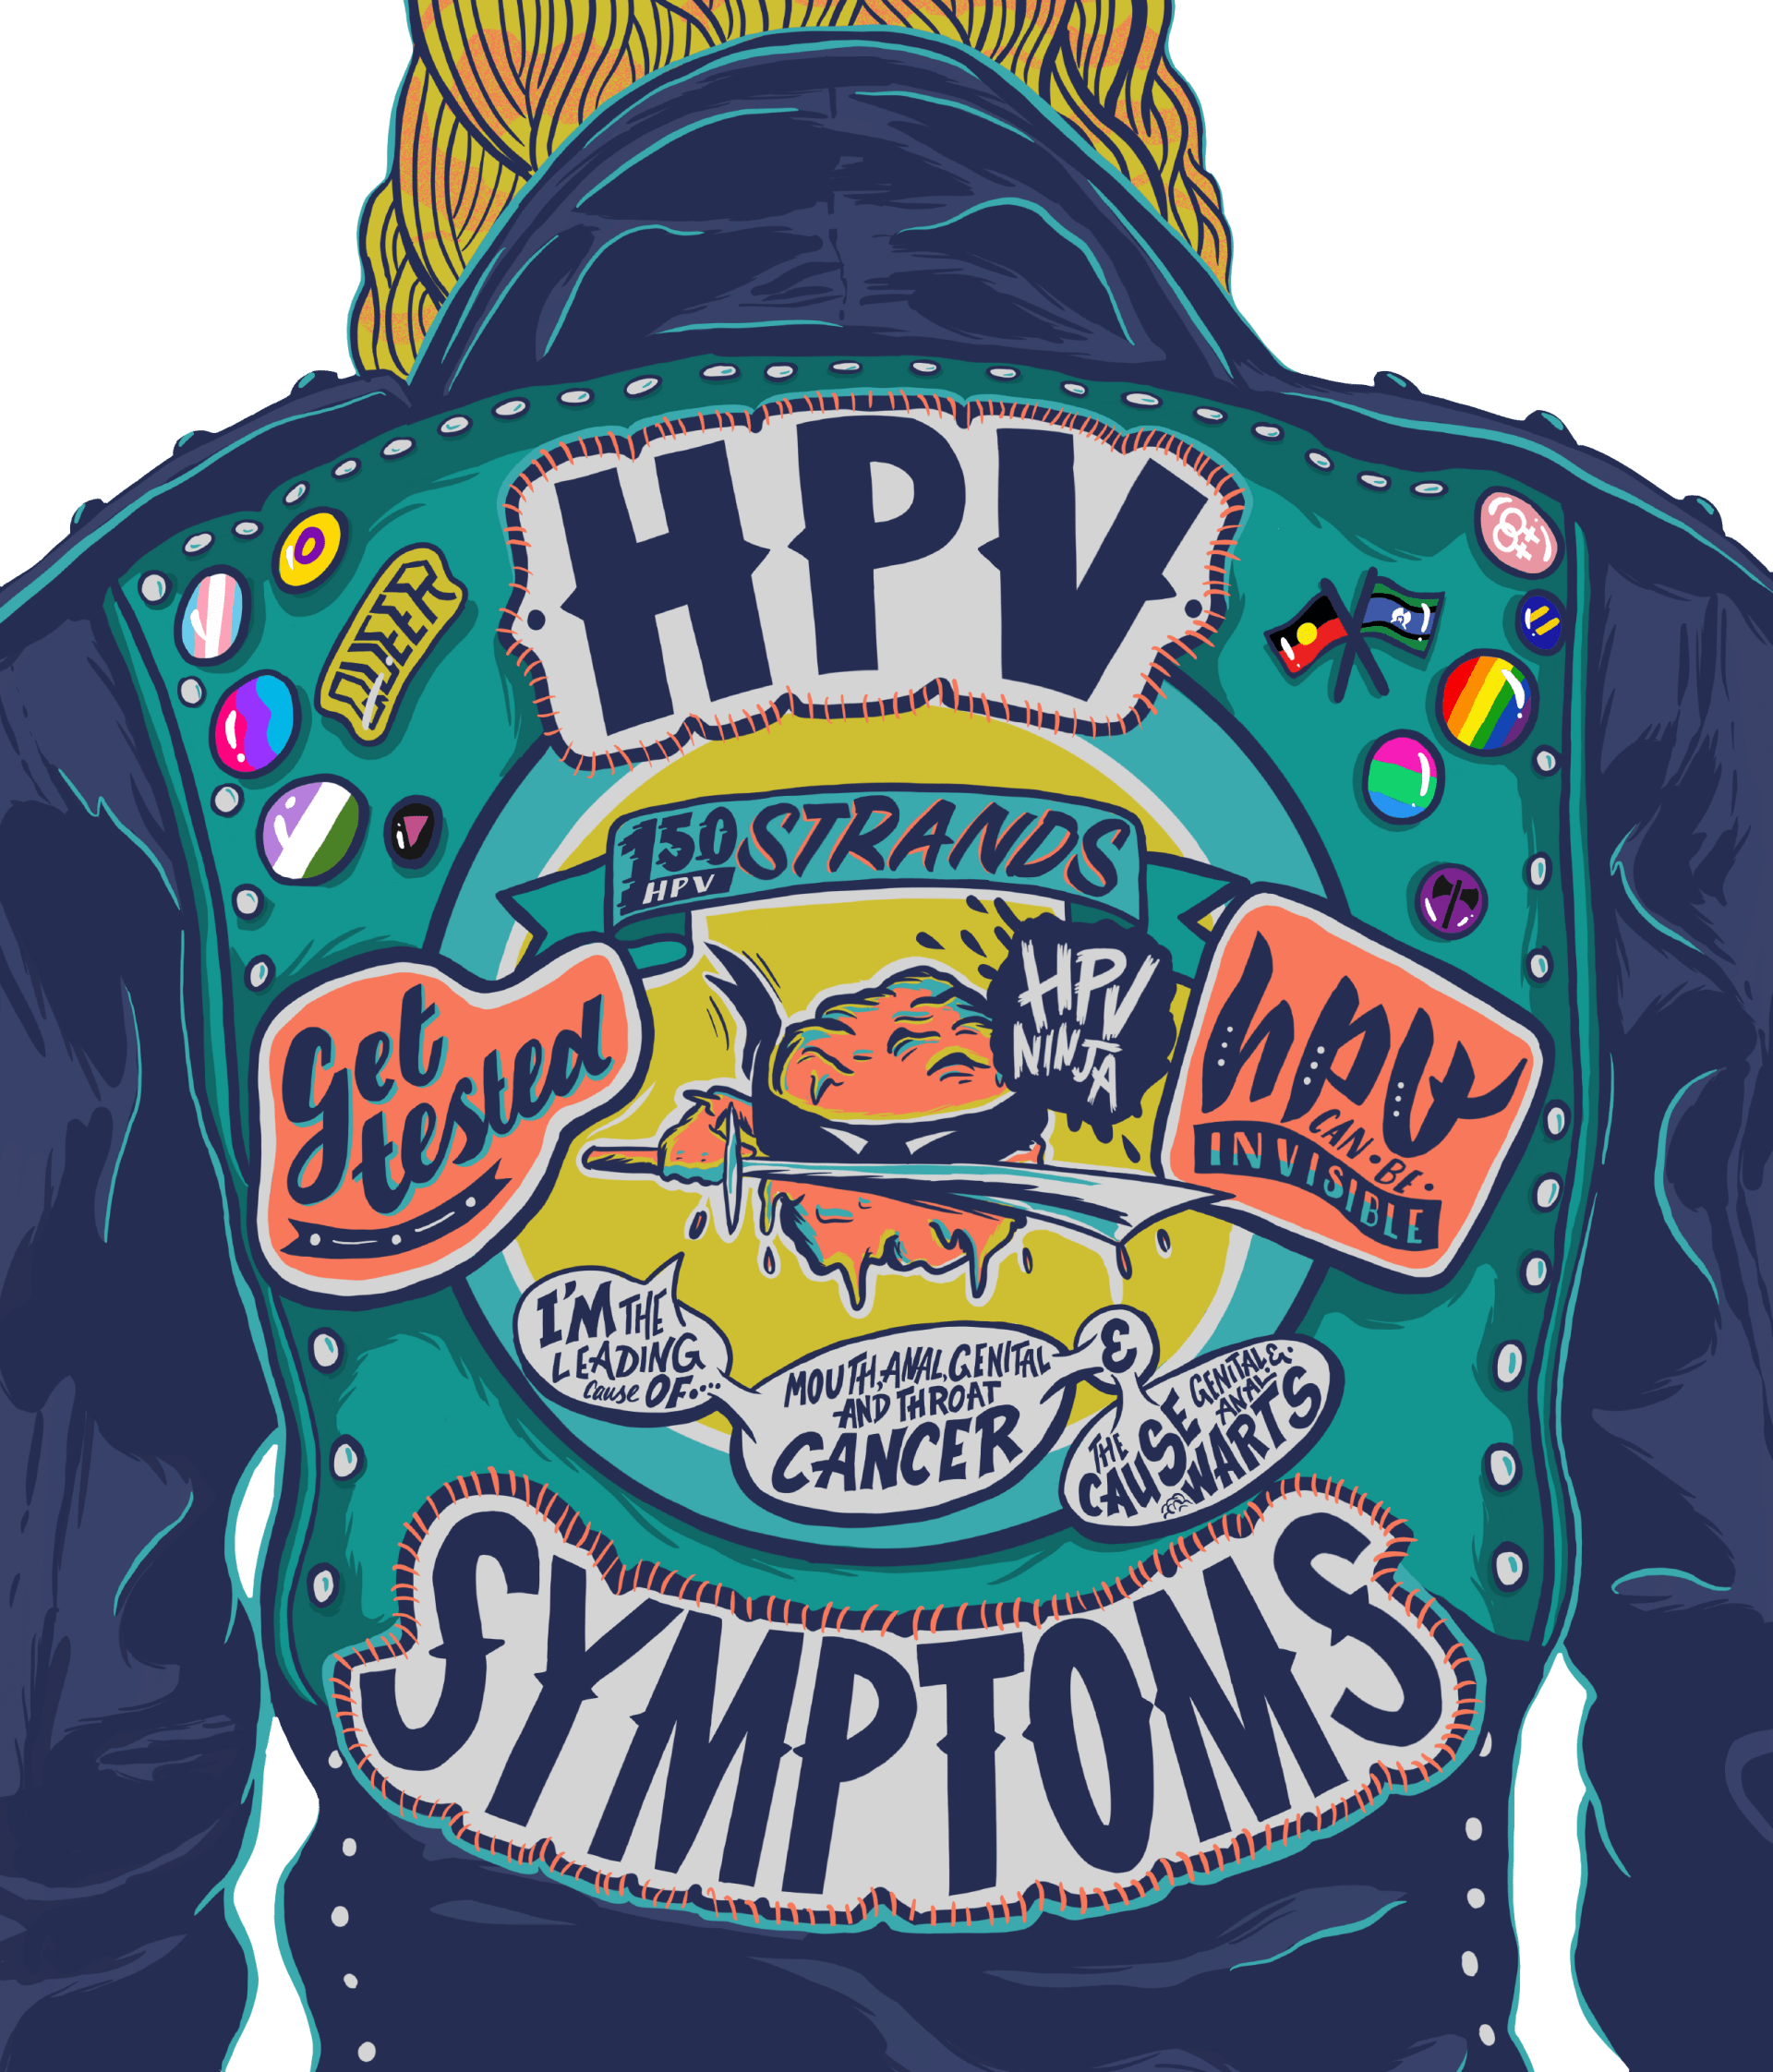 HPV Signs and Symptoms illustration